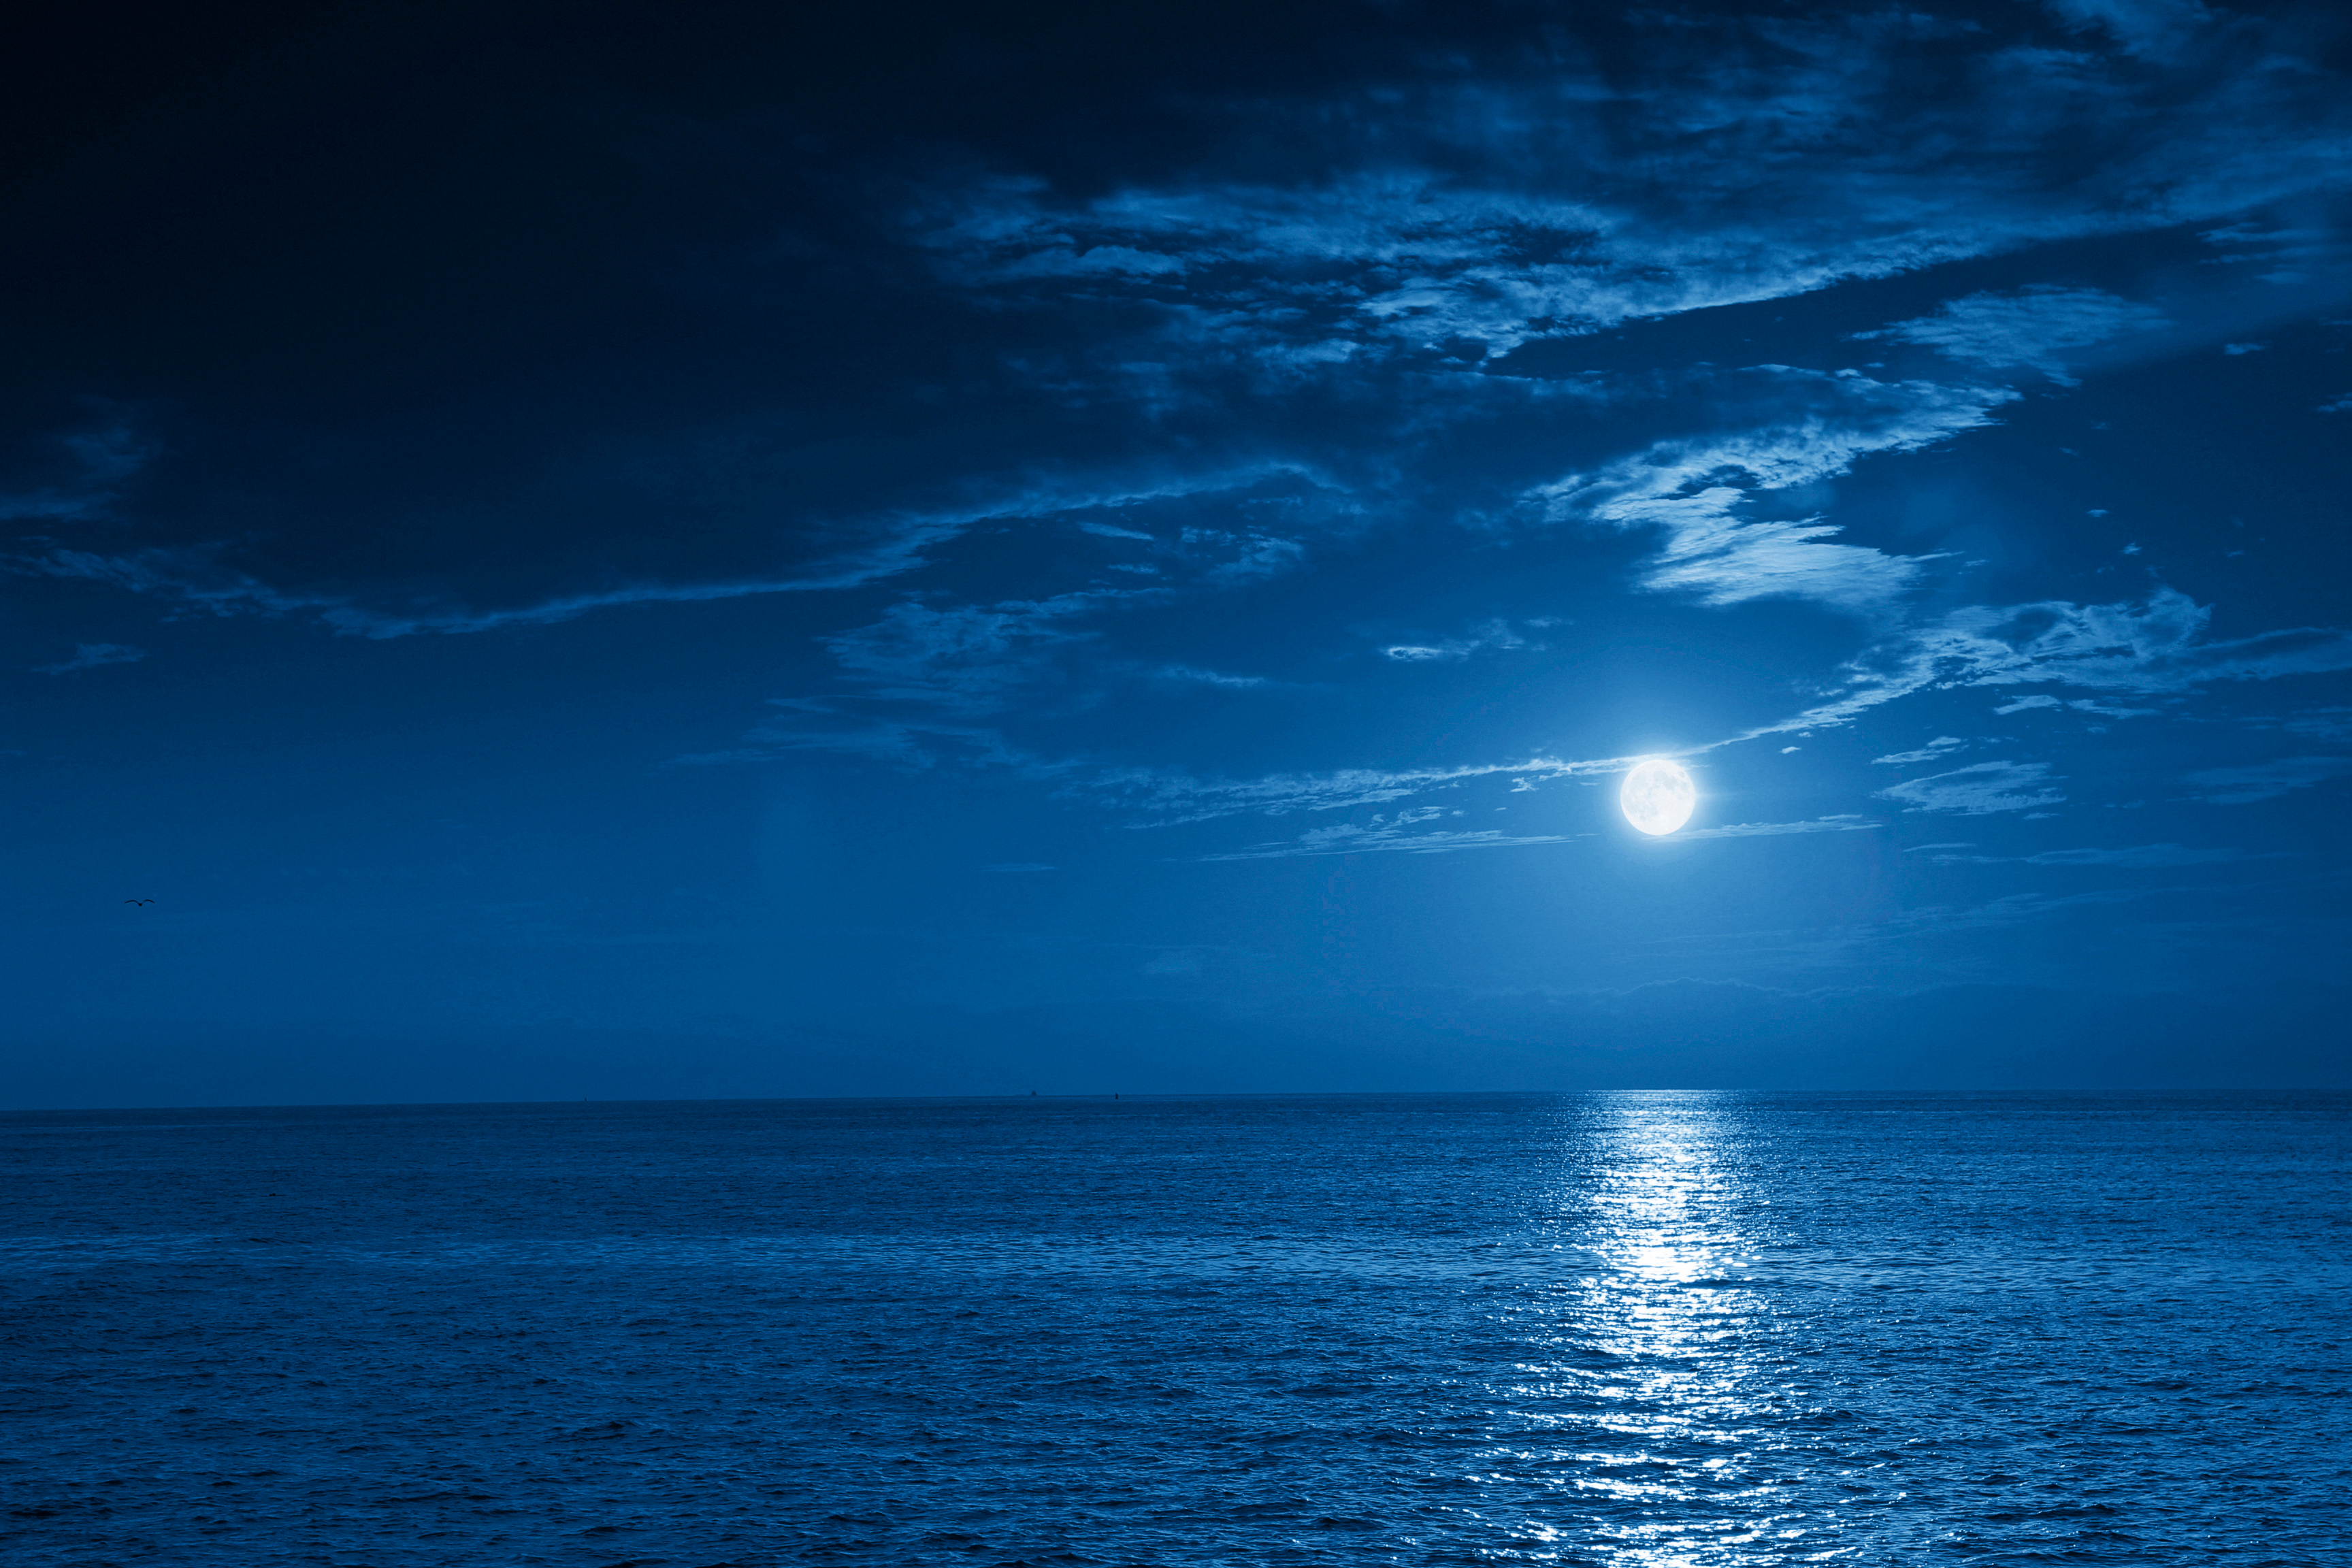 A full moon over the sea in the night sky